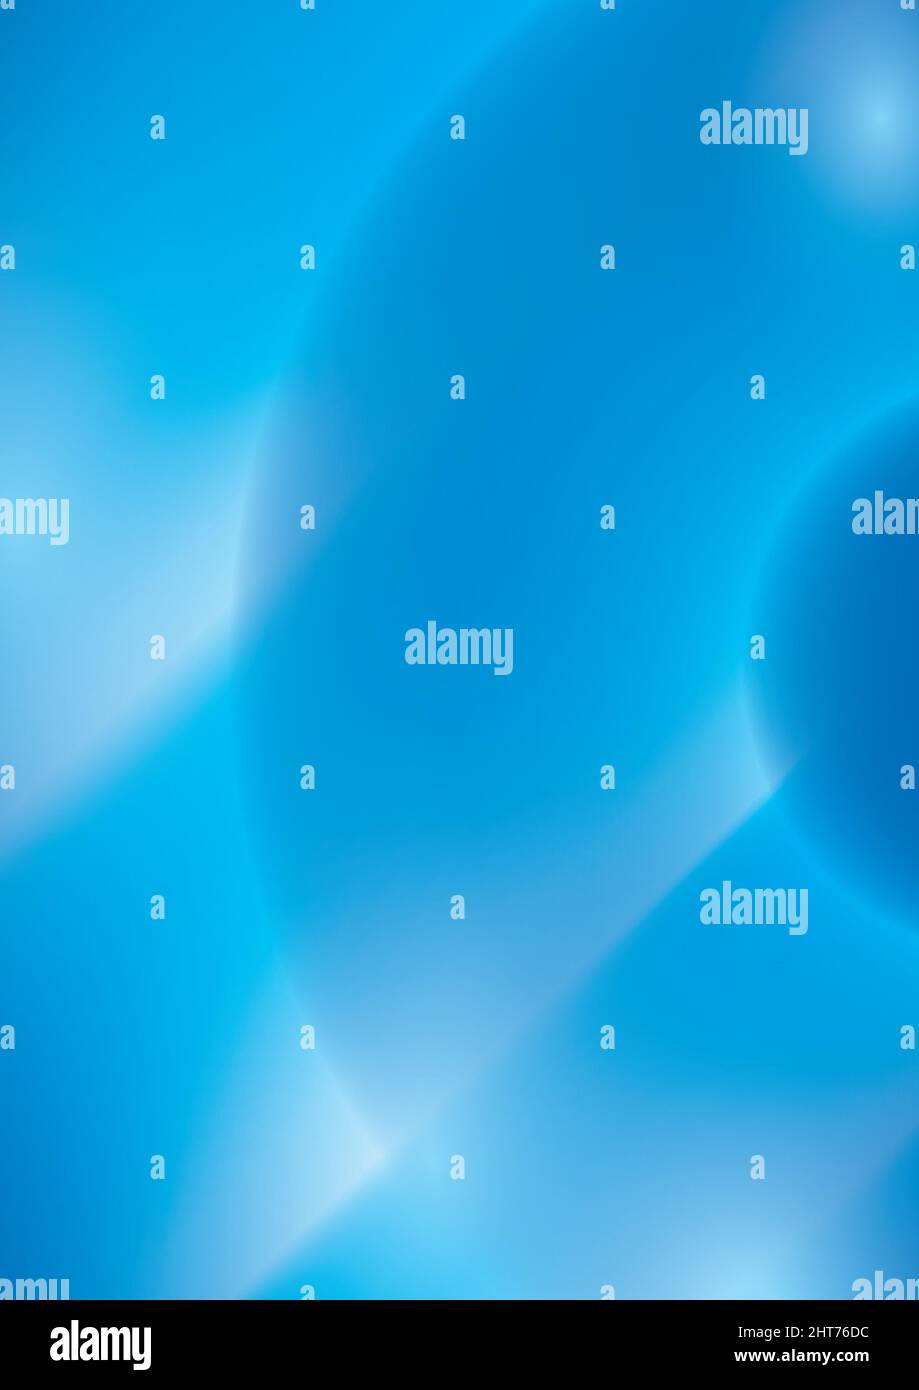 blue abstract background - vector illustration Stock Vector